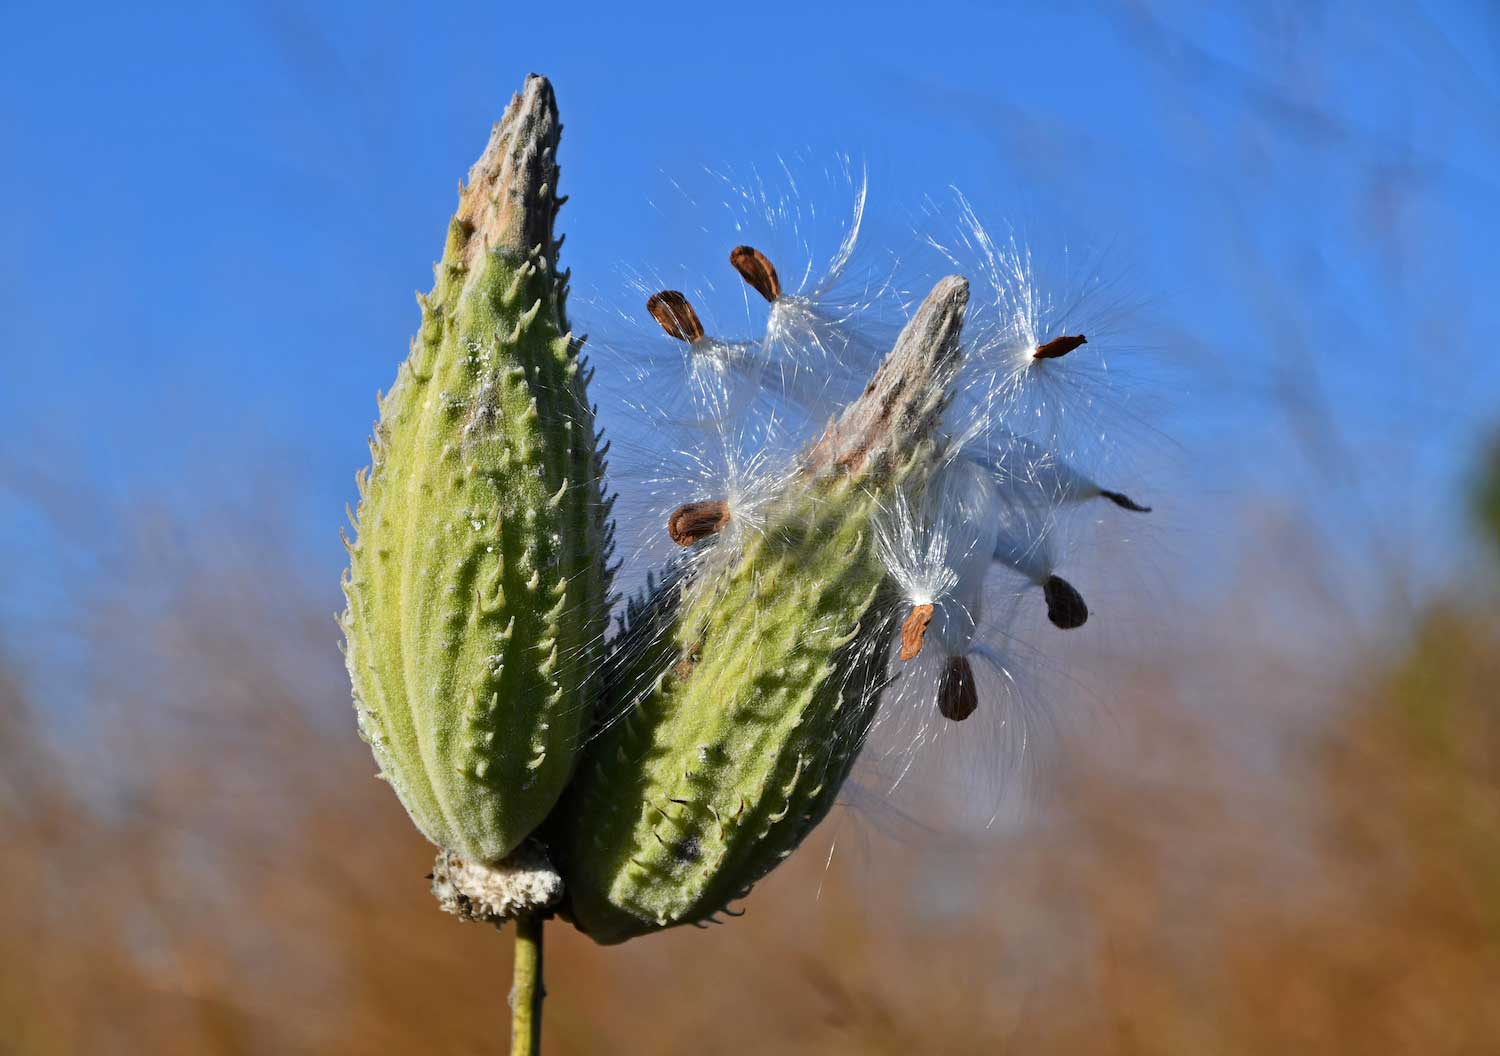 Milkweed pods with seeds in the silky floss.